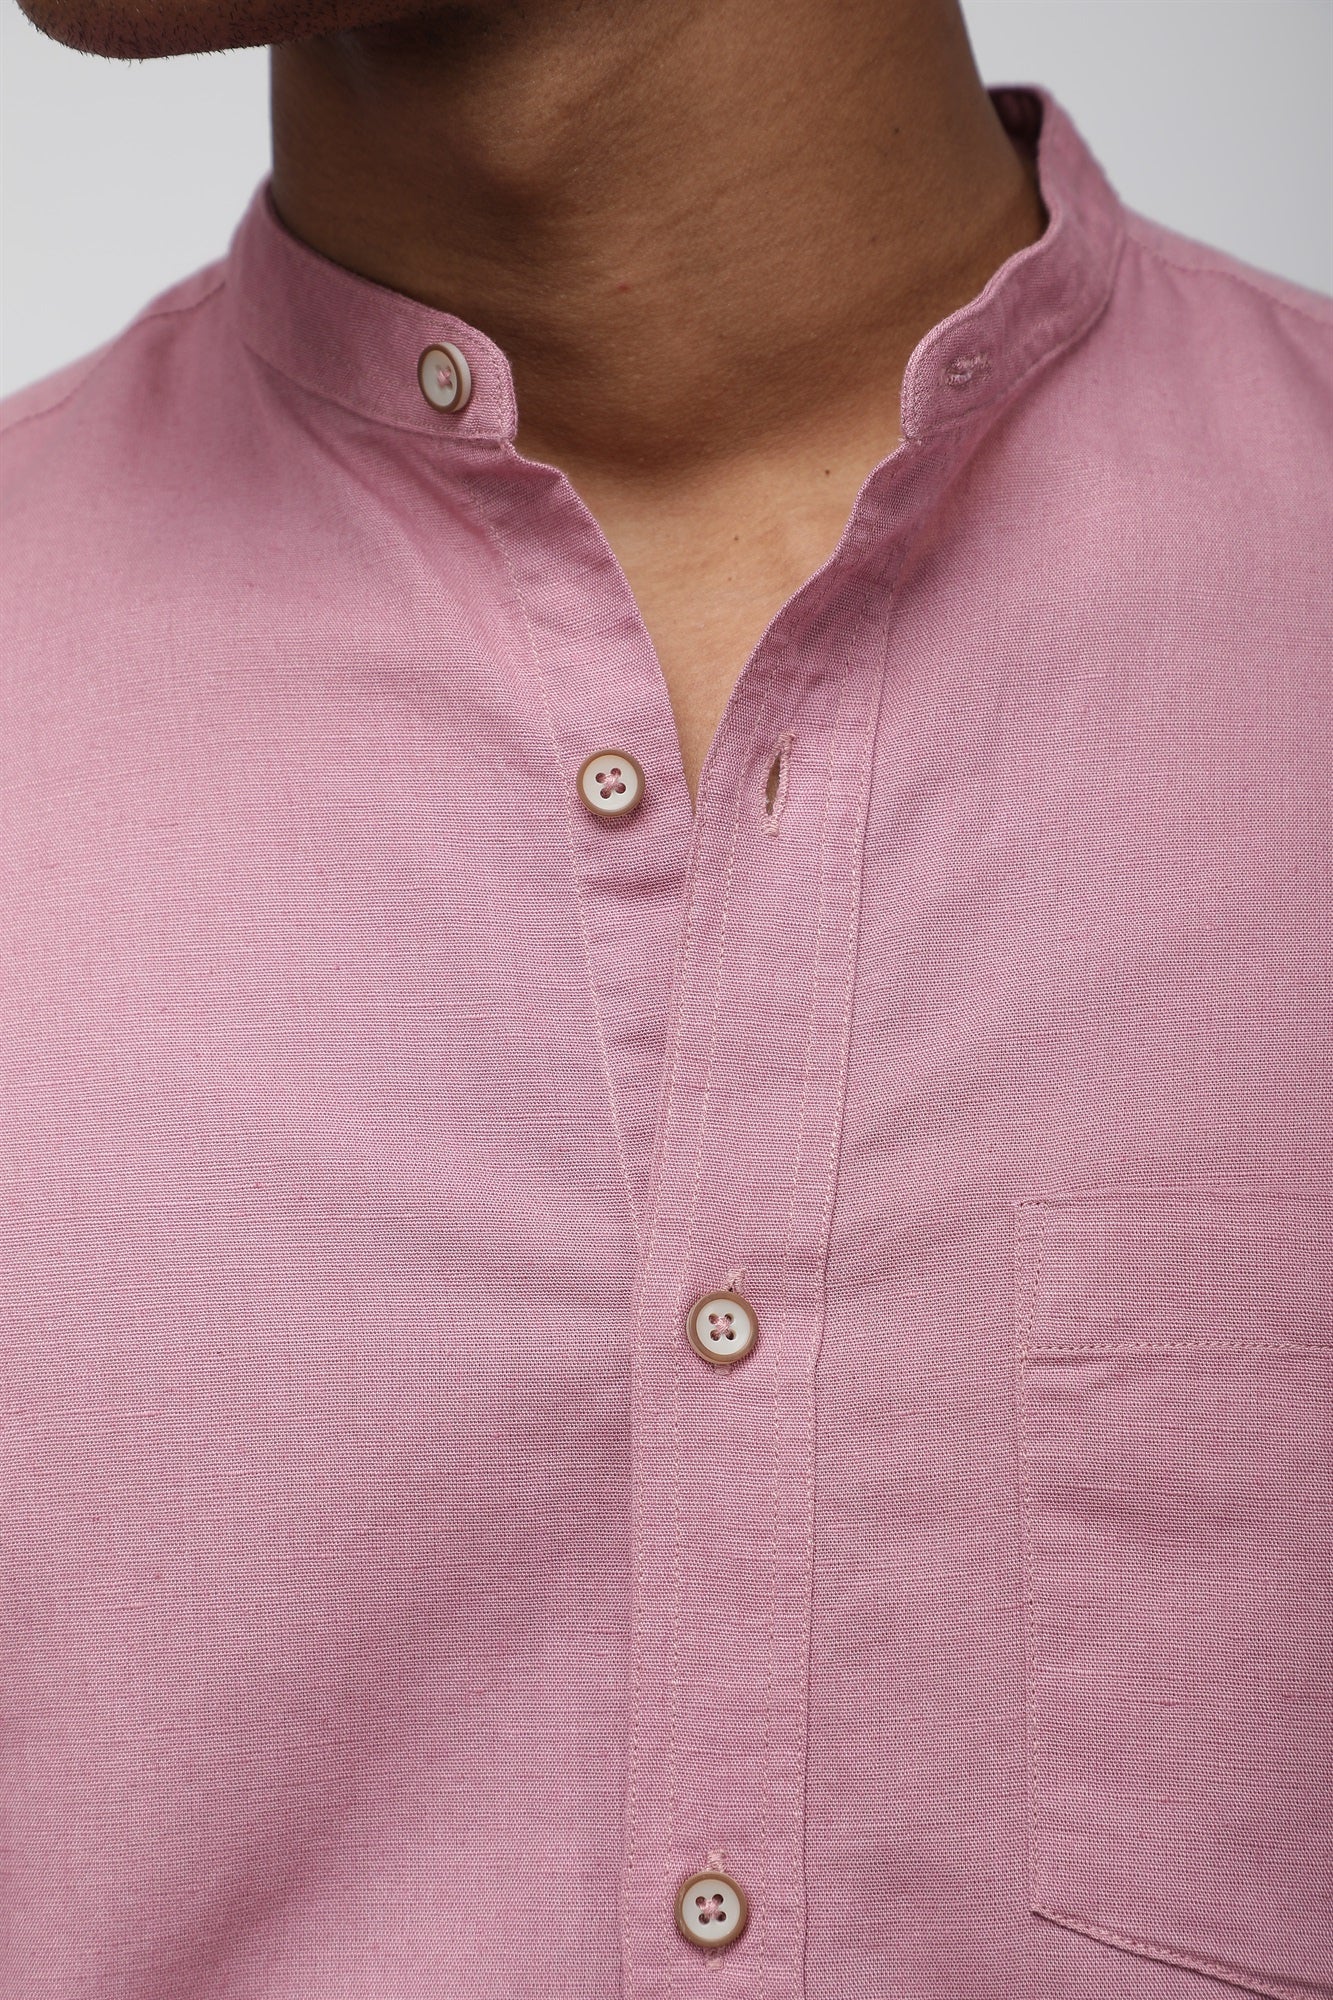 Bare Brown Mandarin Collar Cotton Linen Shirt, Slim Fit with Full Sleeves - Mauve